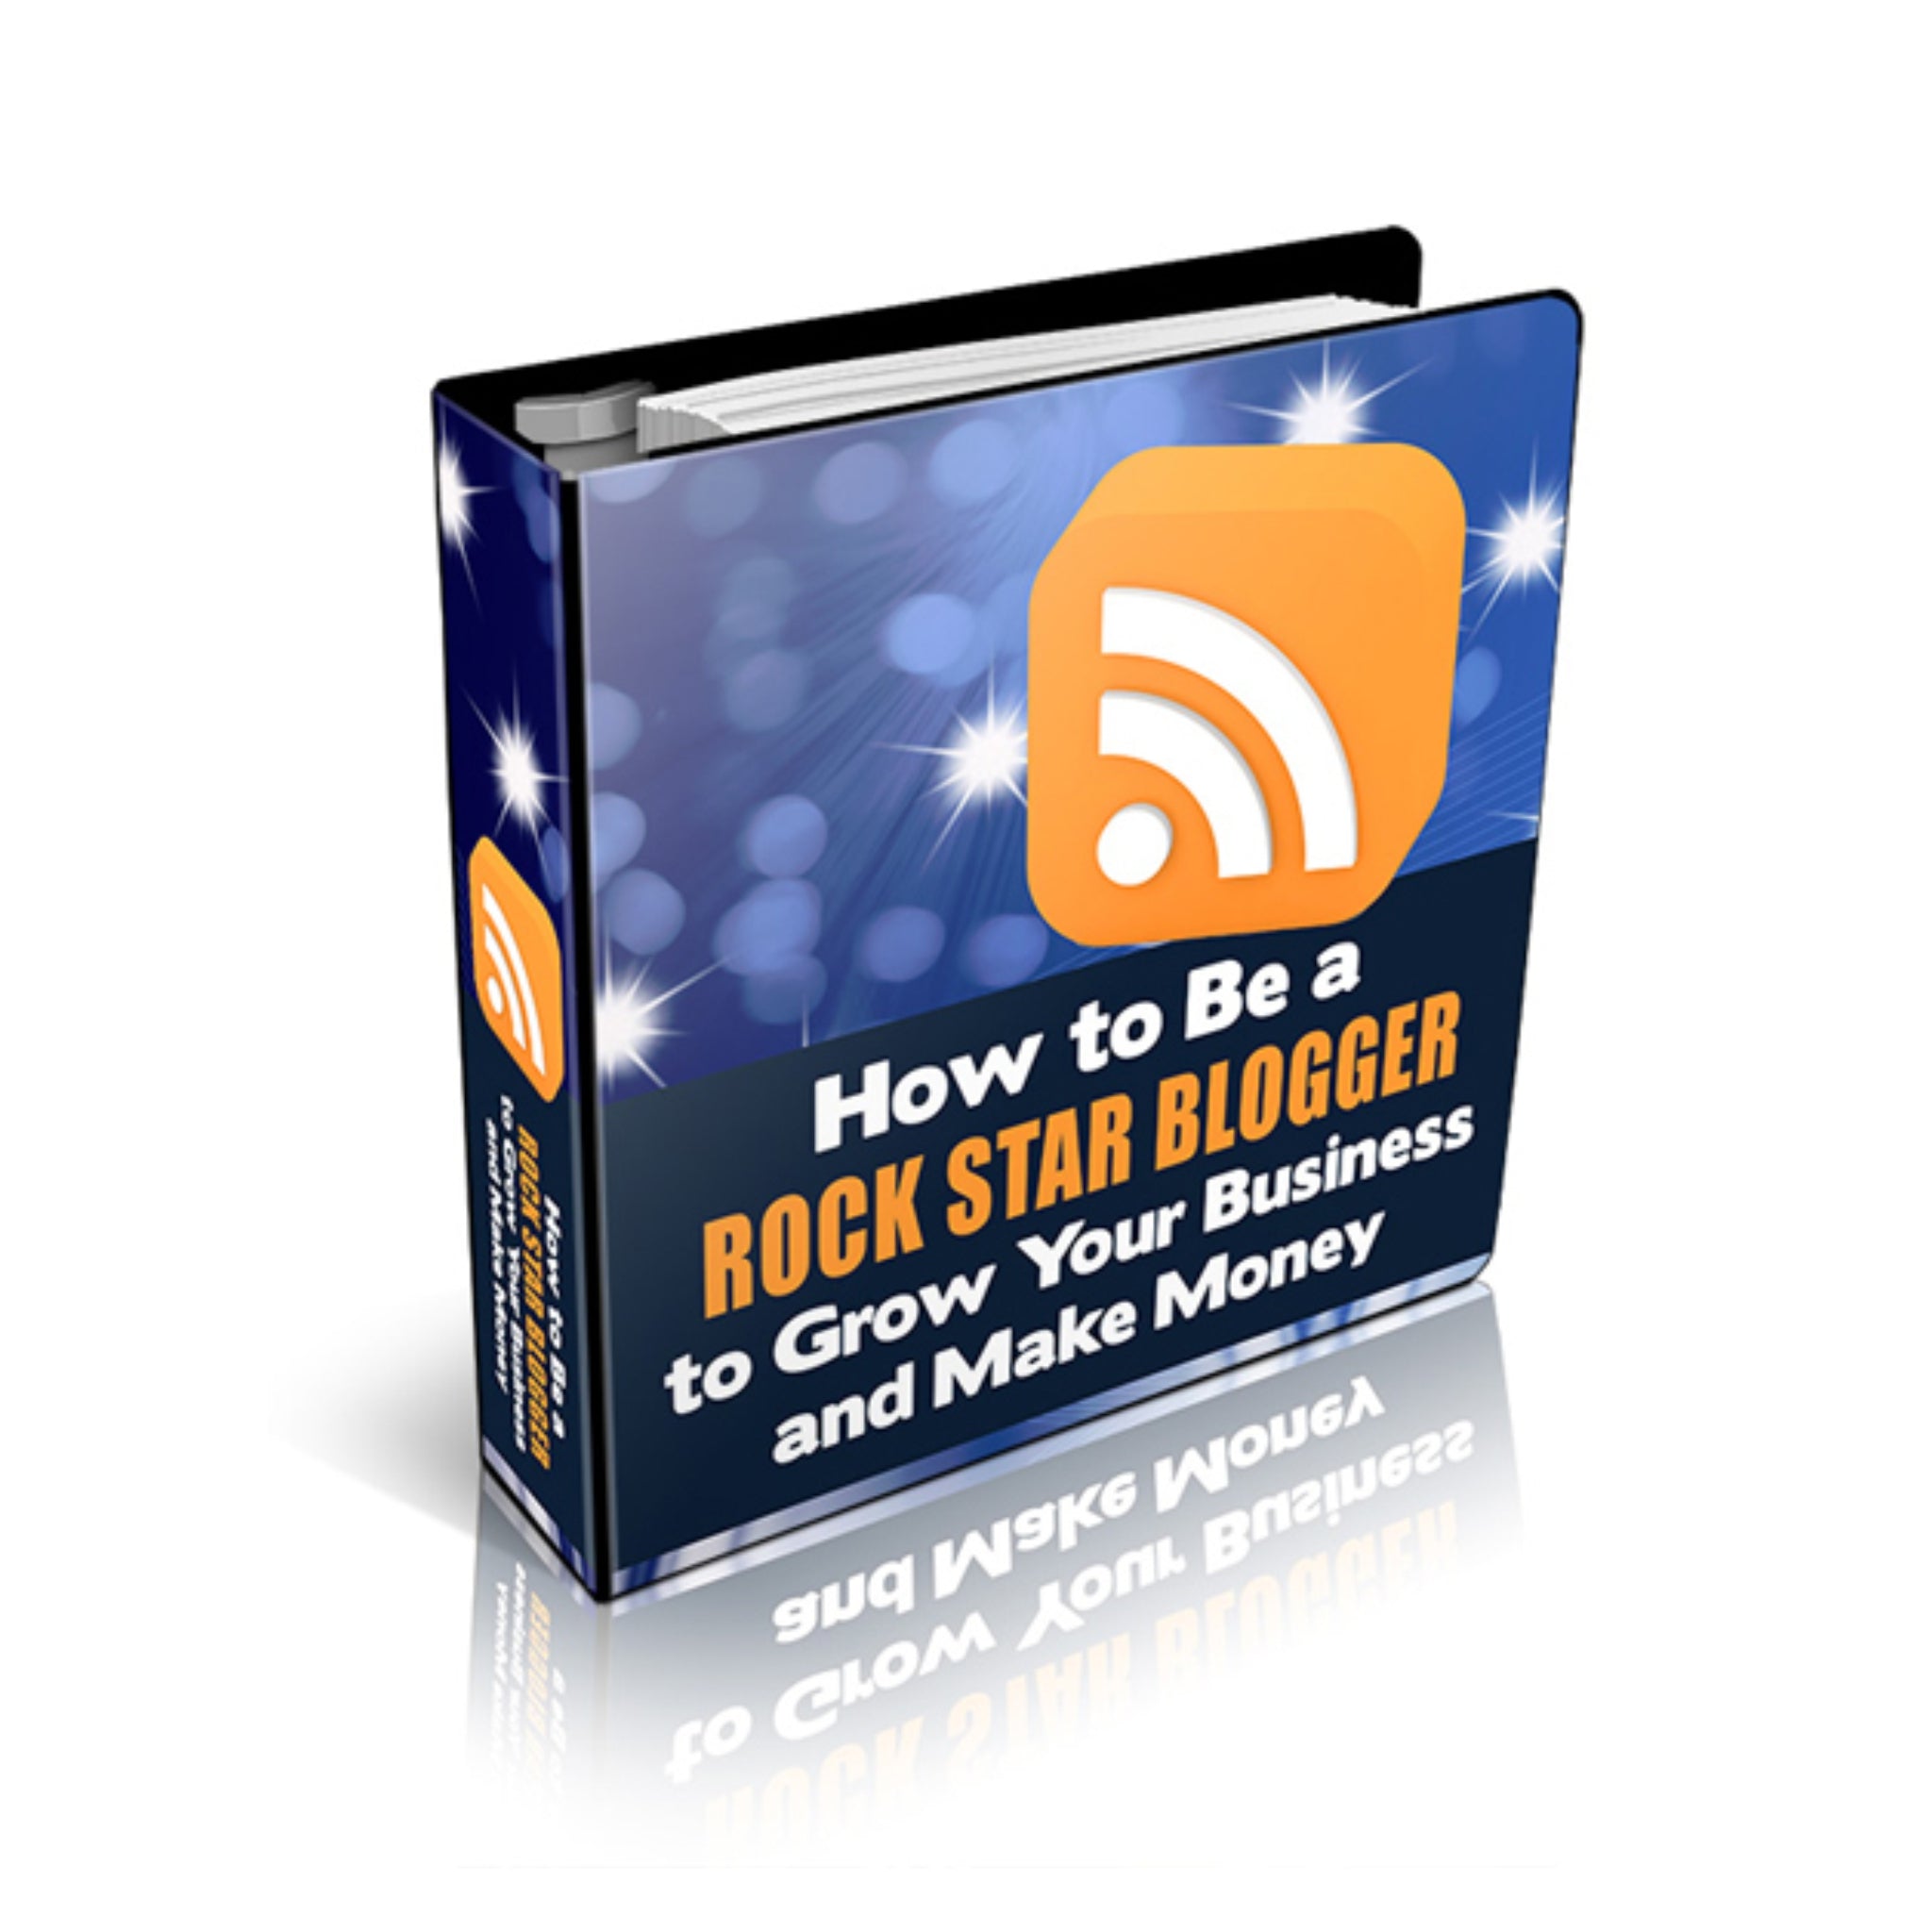 How To Be A Rock Star Blogger To Grow Your Business Ebook